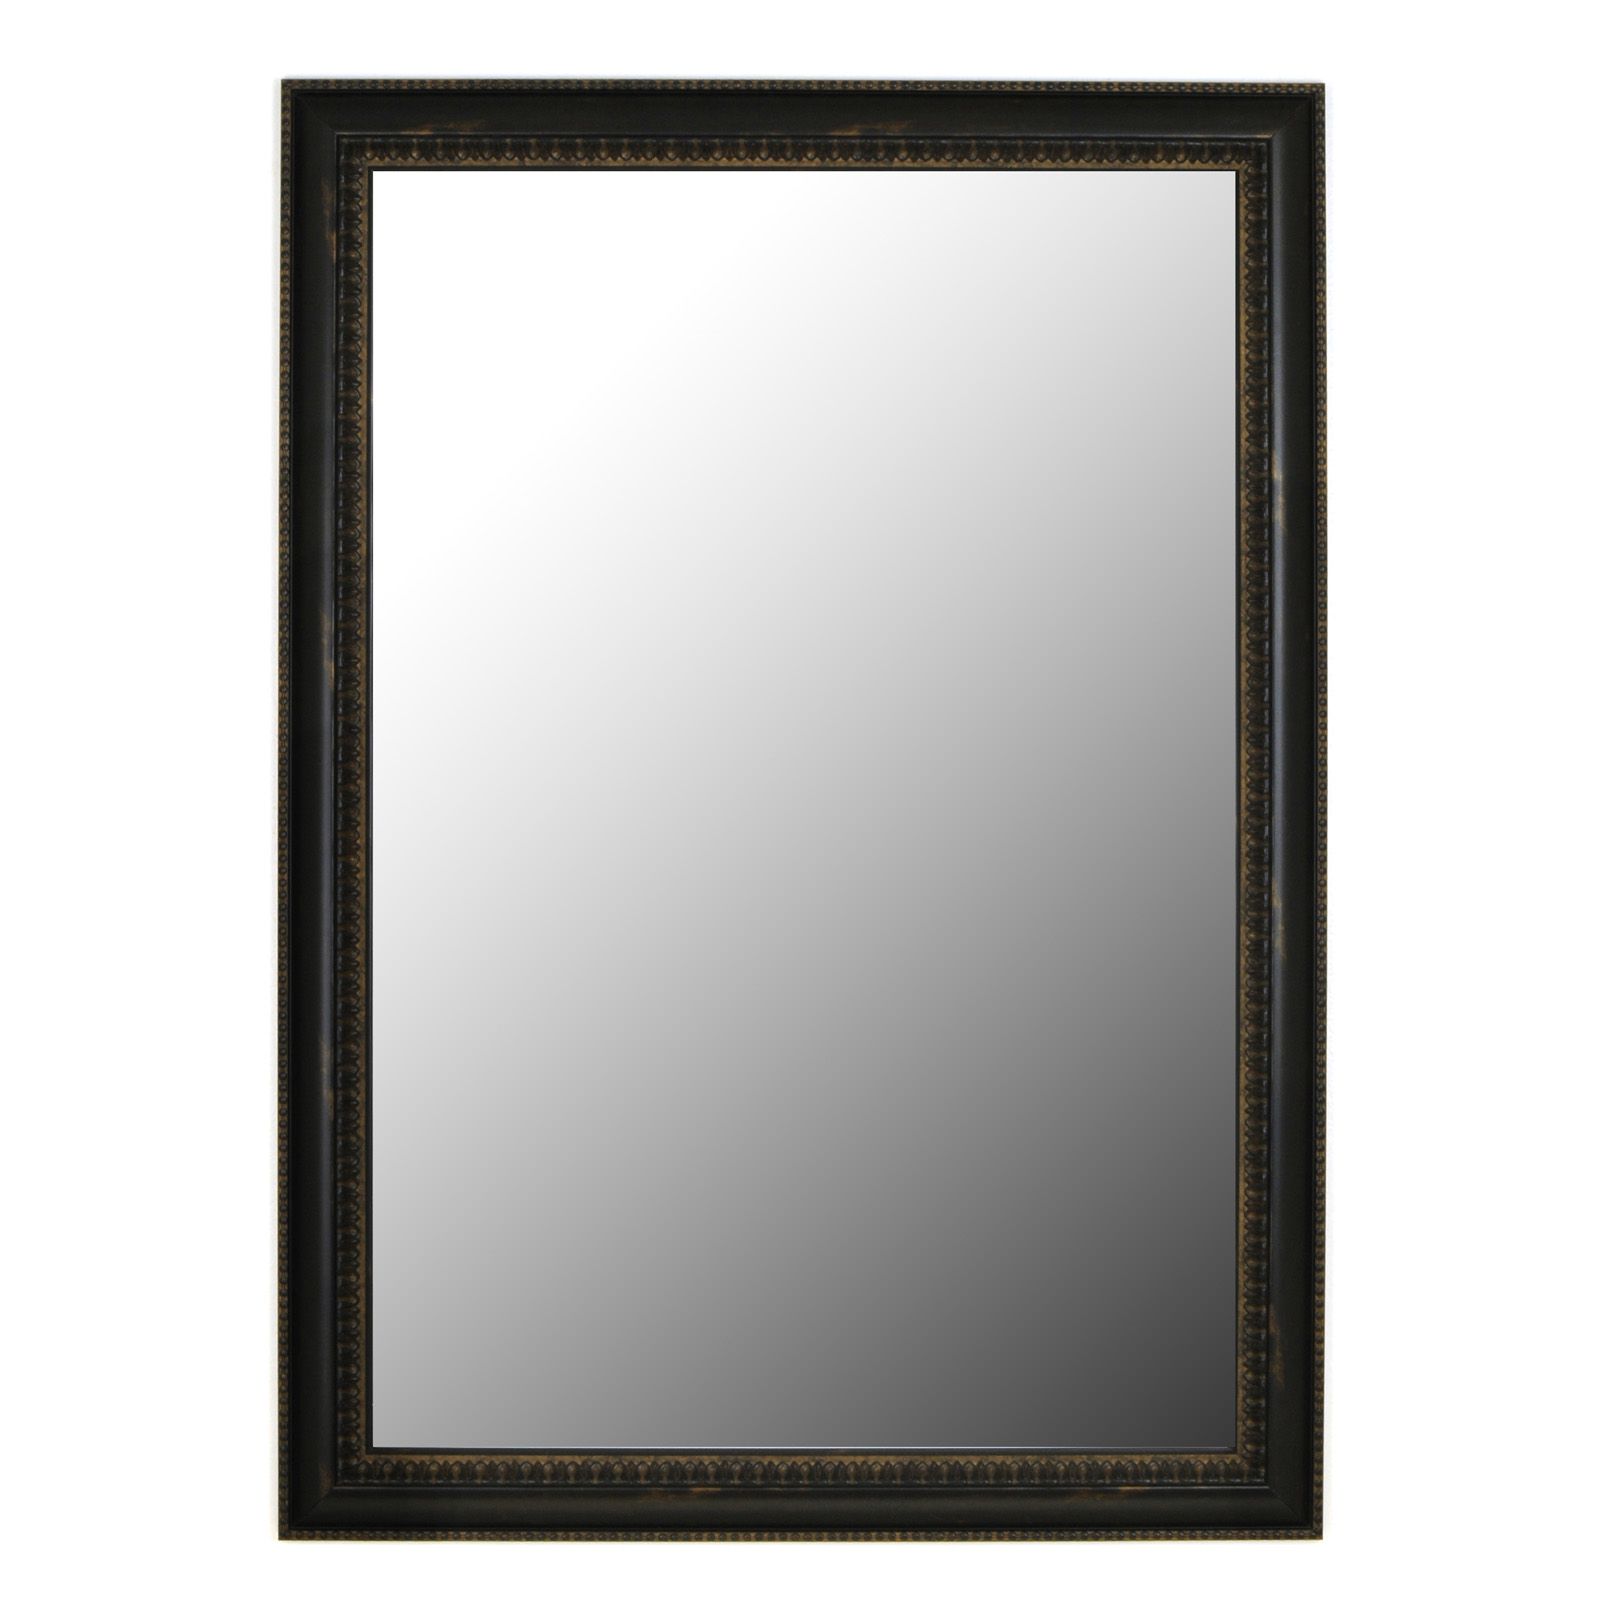 Second Look Mirrors Beaded Copper Black Petite Wall Mirror – Mirrors At For Black Beaded Rectangular Wall Mirrors (View 7 of 15)